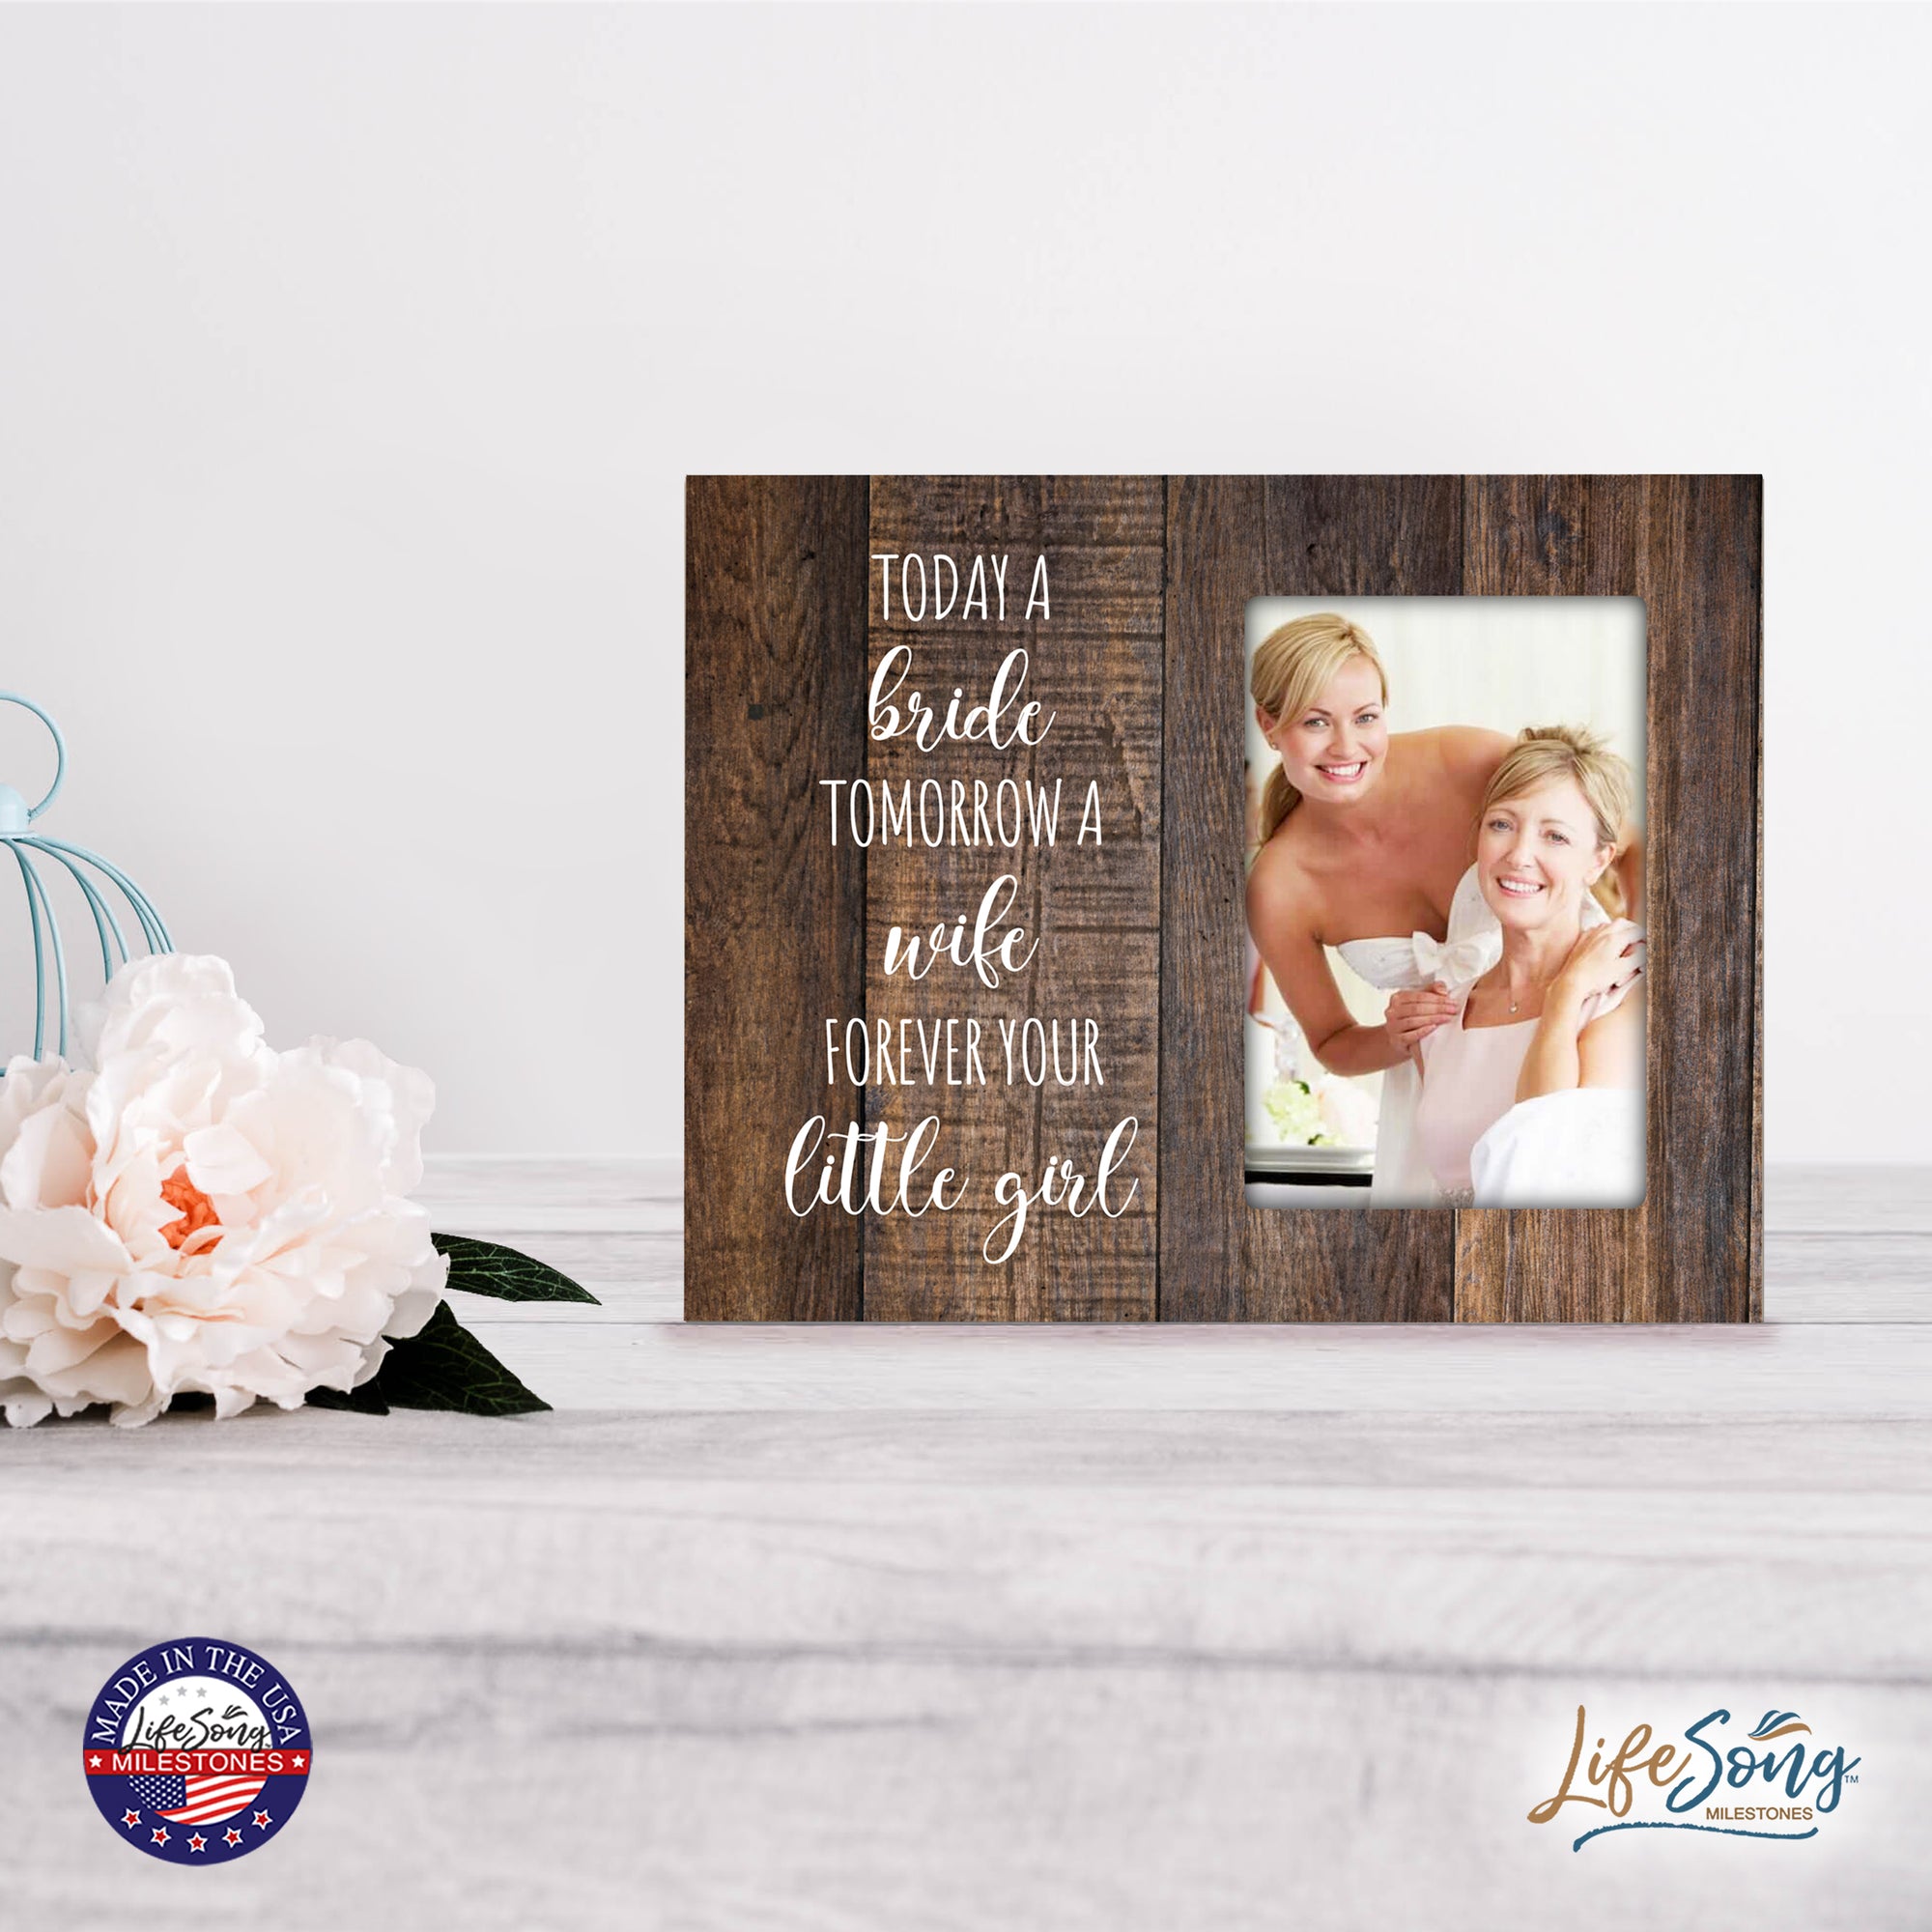 Wooden 8x10 Wedding Picture Frame Holds 4x6 Photo - Today A Bride